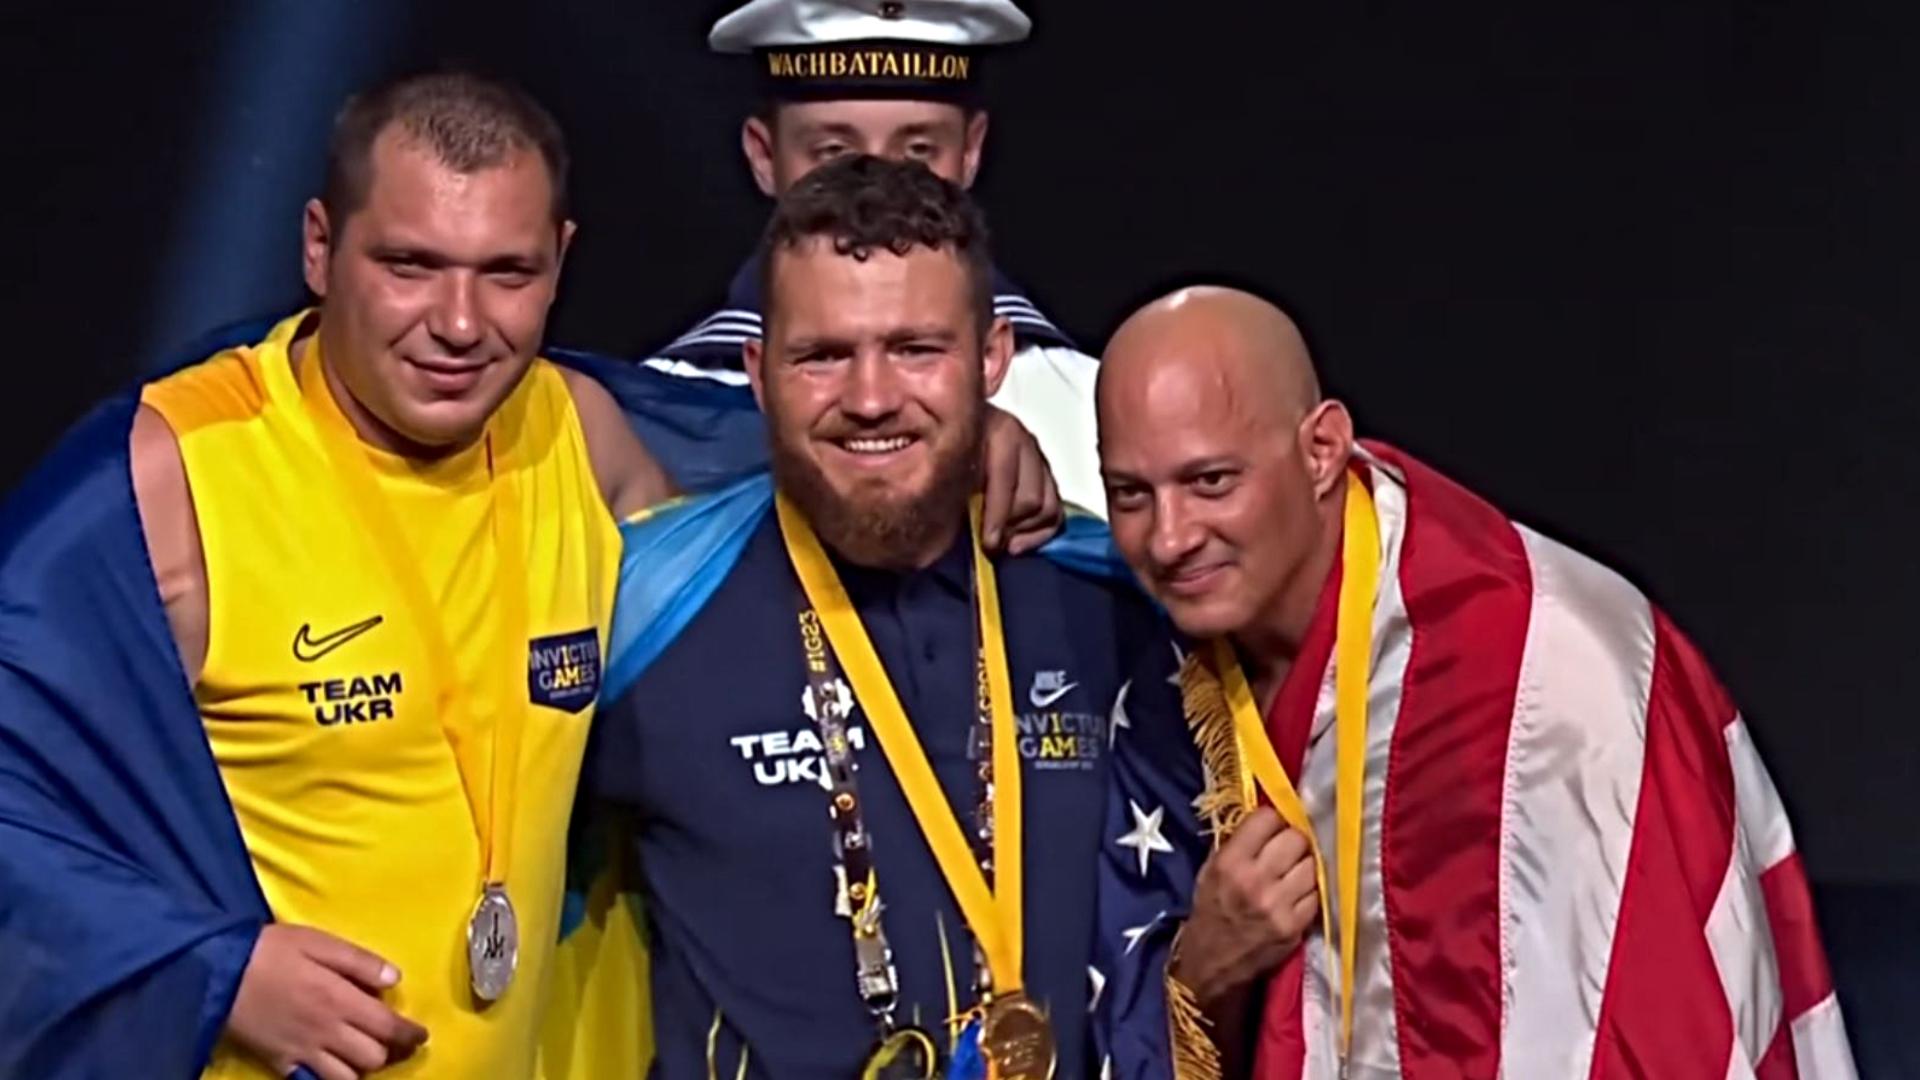 How the Invictus Games provide hope for military veterans